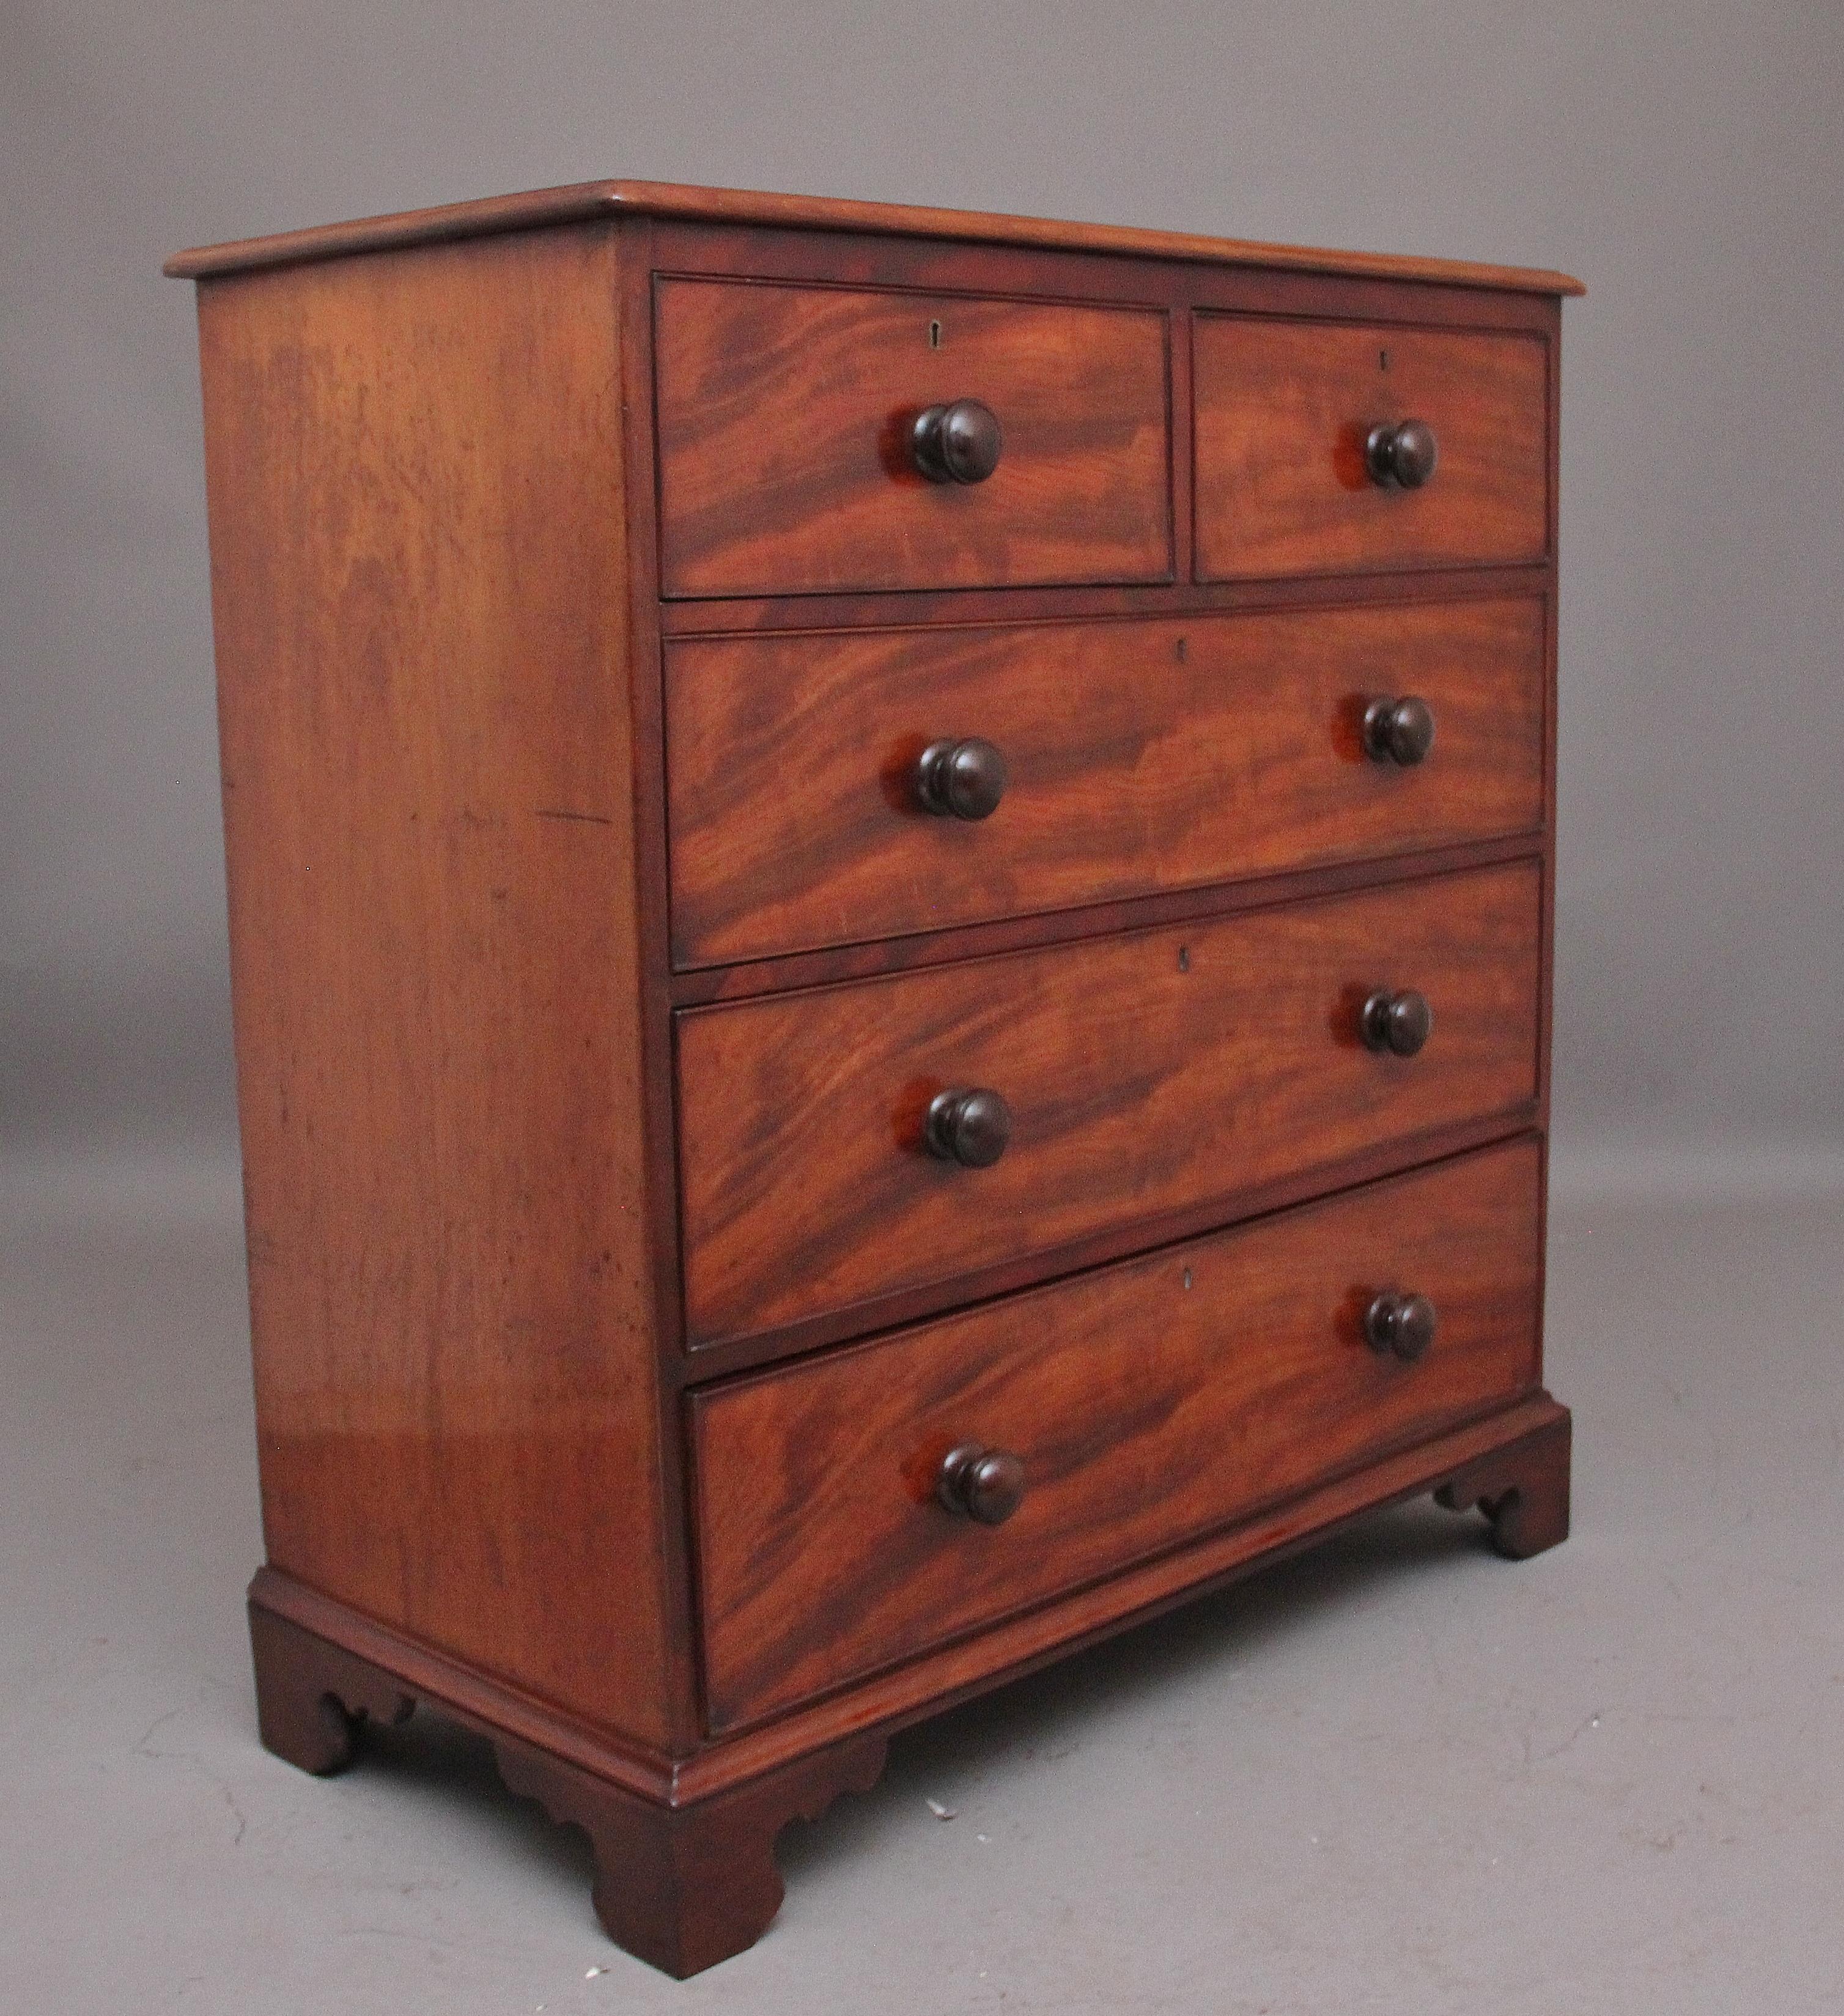 19th Century mahogany chest of drawers, having a nice figured top with a moulded edge above a selection of two over three mahogany lined graduated drawers with the original turned wooden knob handles, standing on bracket feet. Circa 1860.